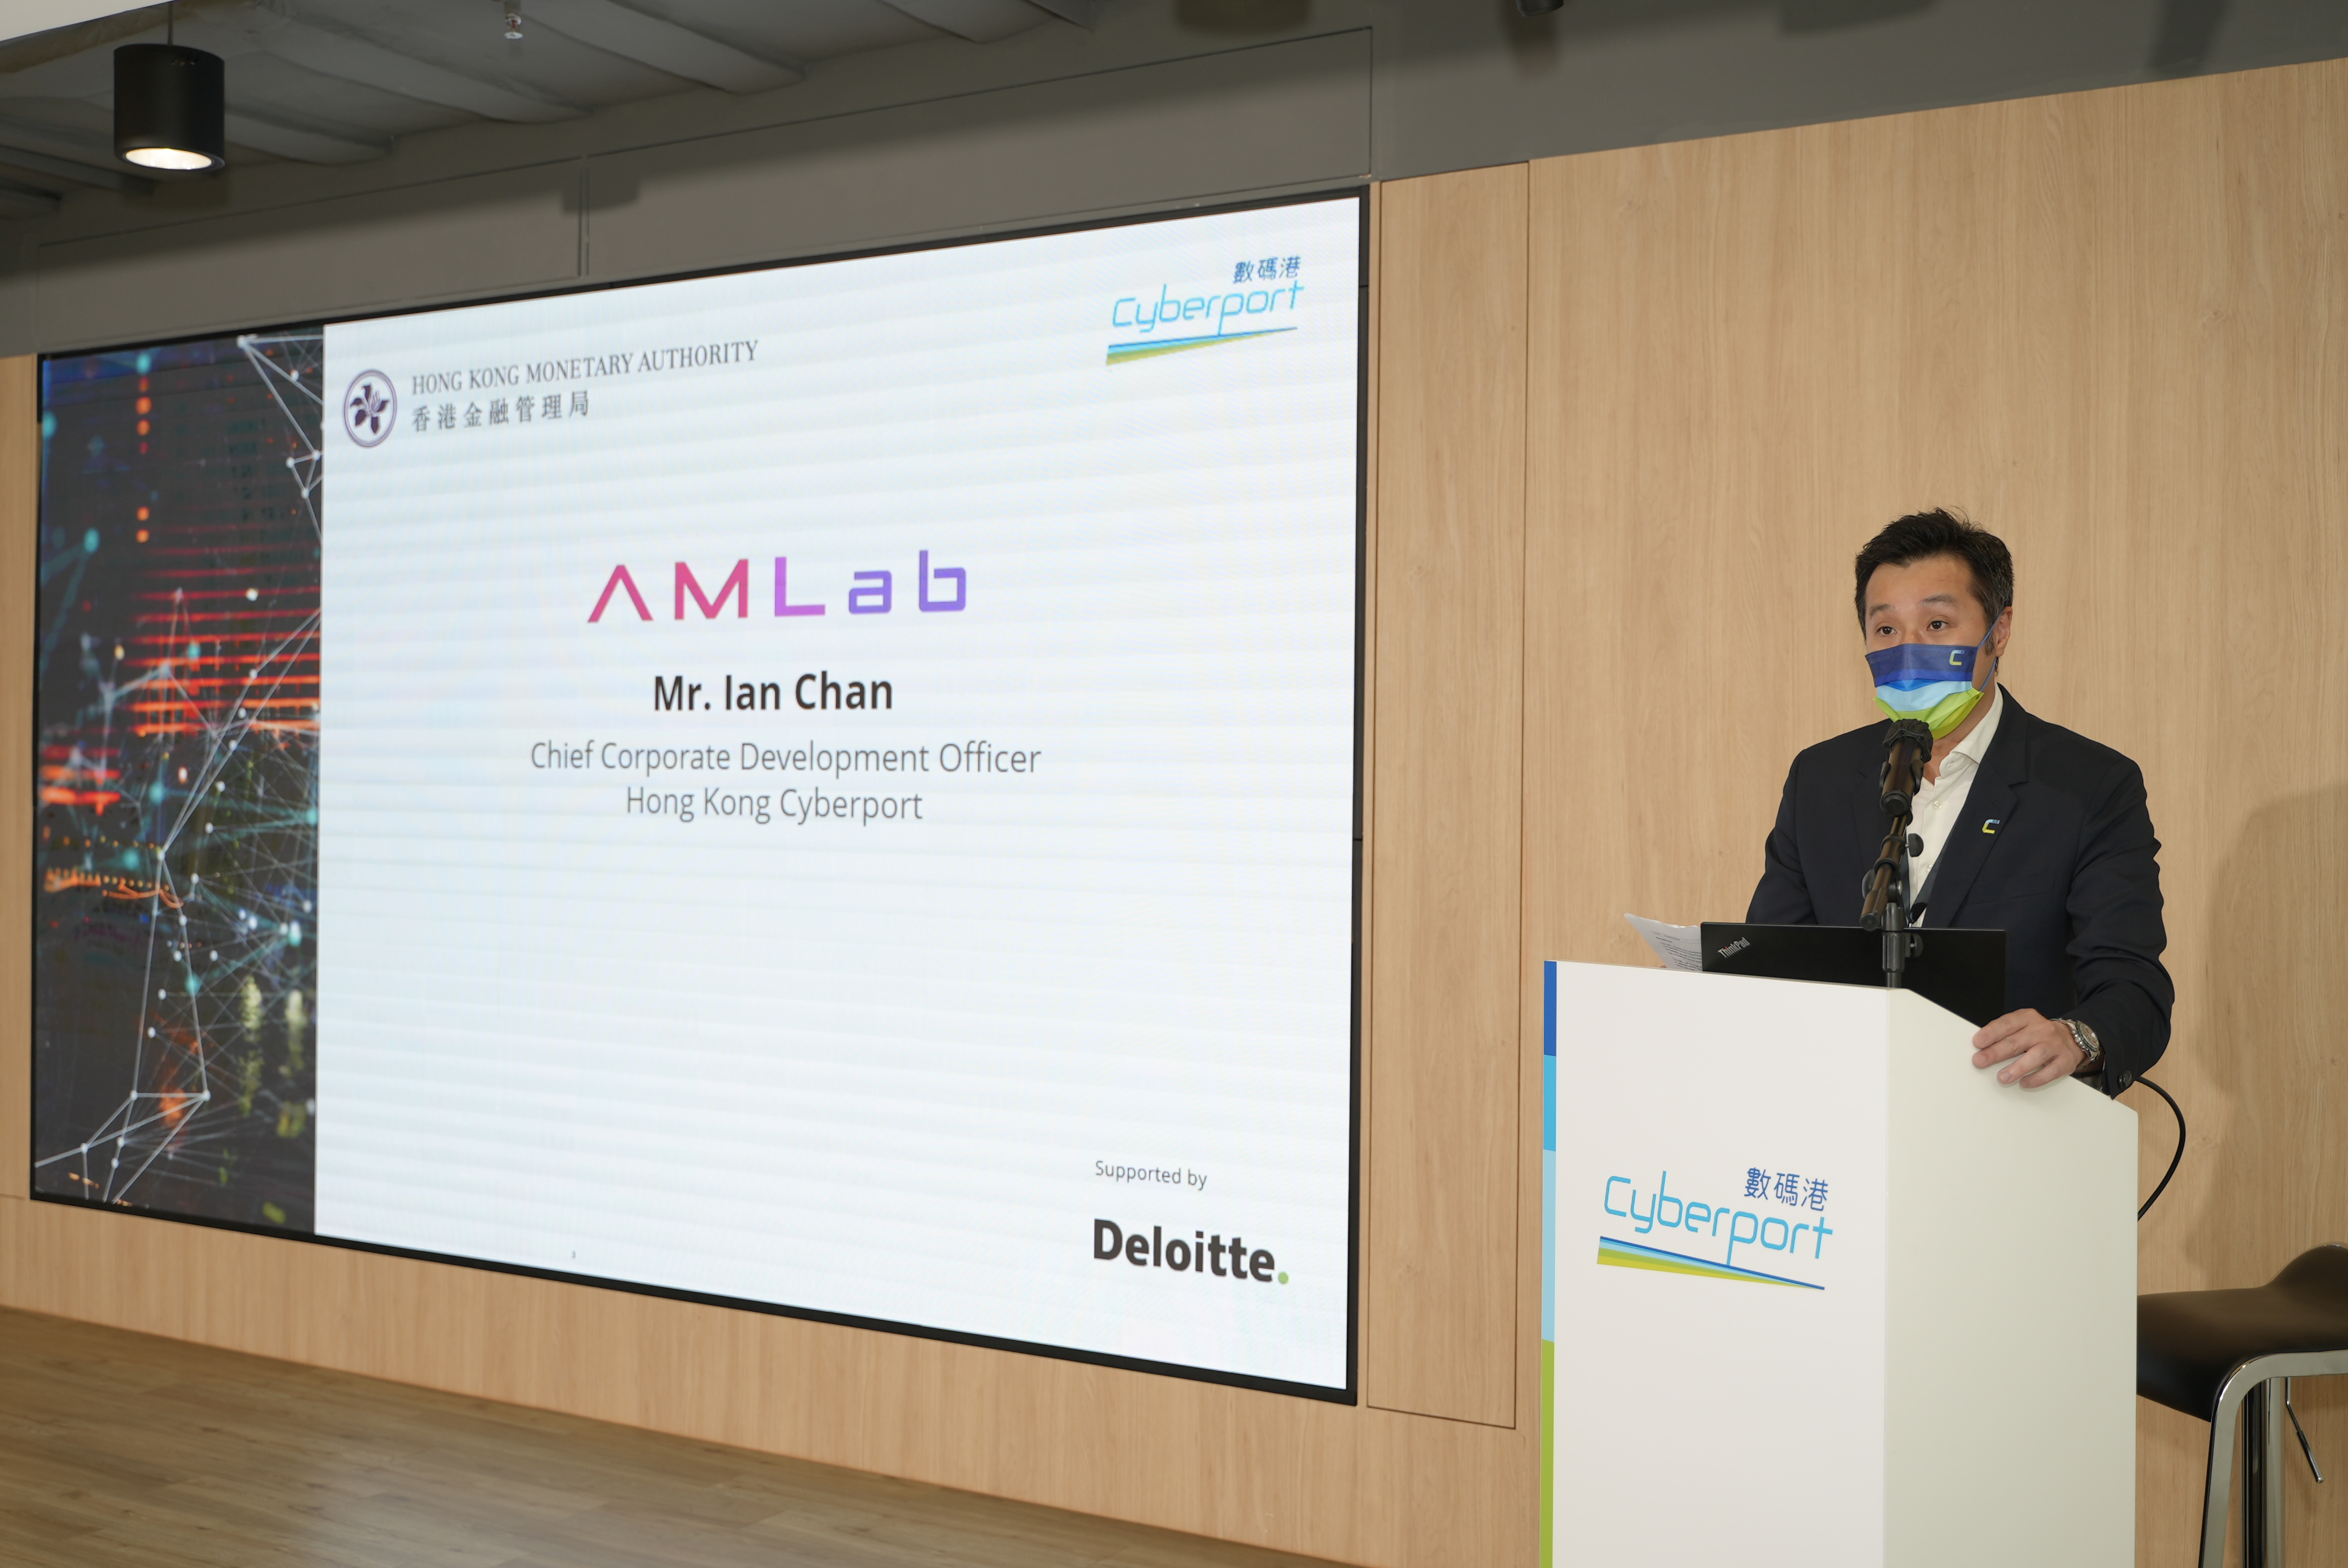 Mr Ian Chan, Chief Corporate Development Officer of the Cyberport delivers remarks at AMLab 3.